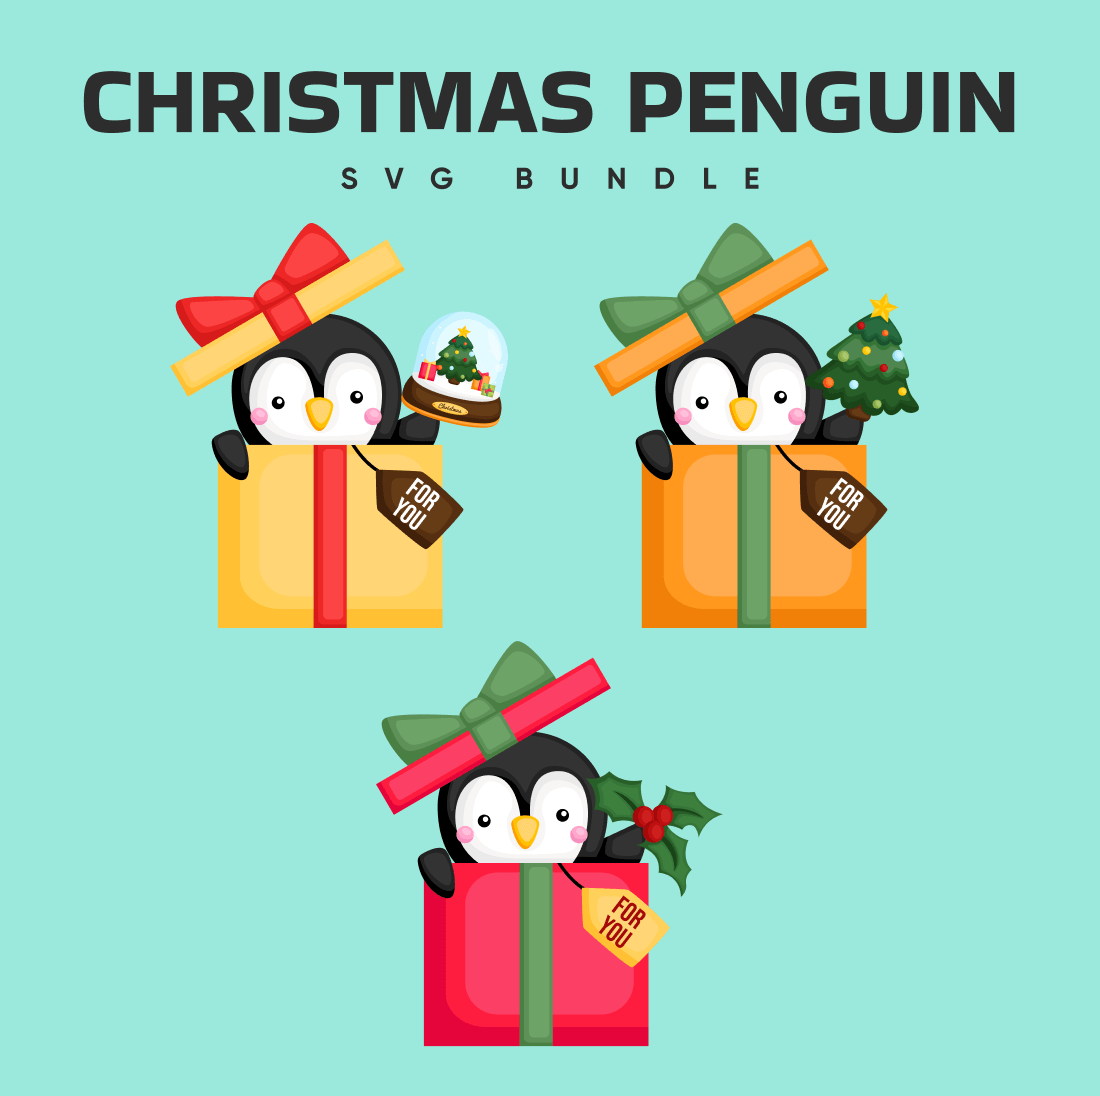 Penguin with a christmas present in a box.